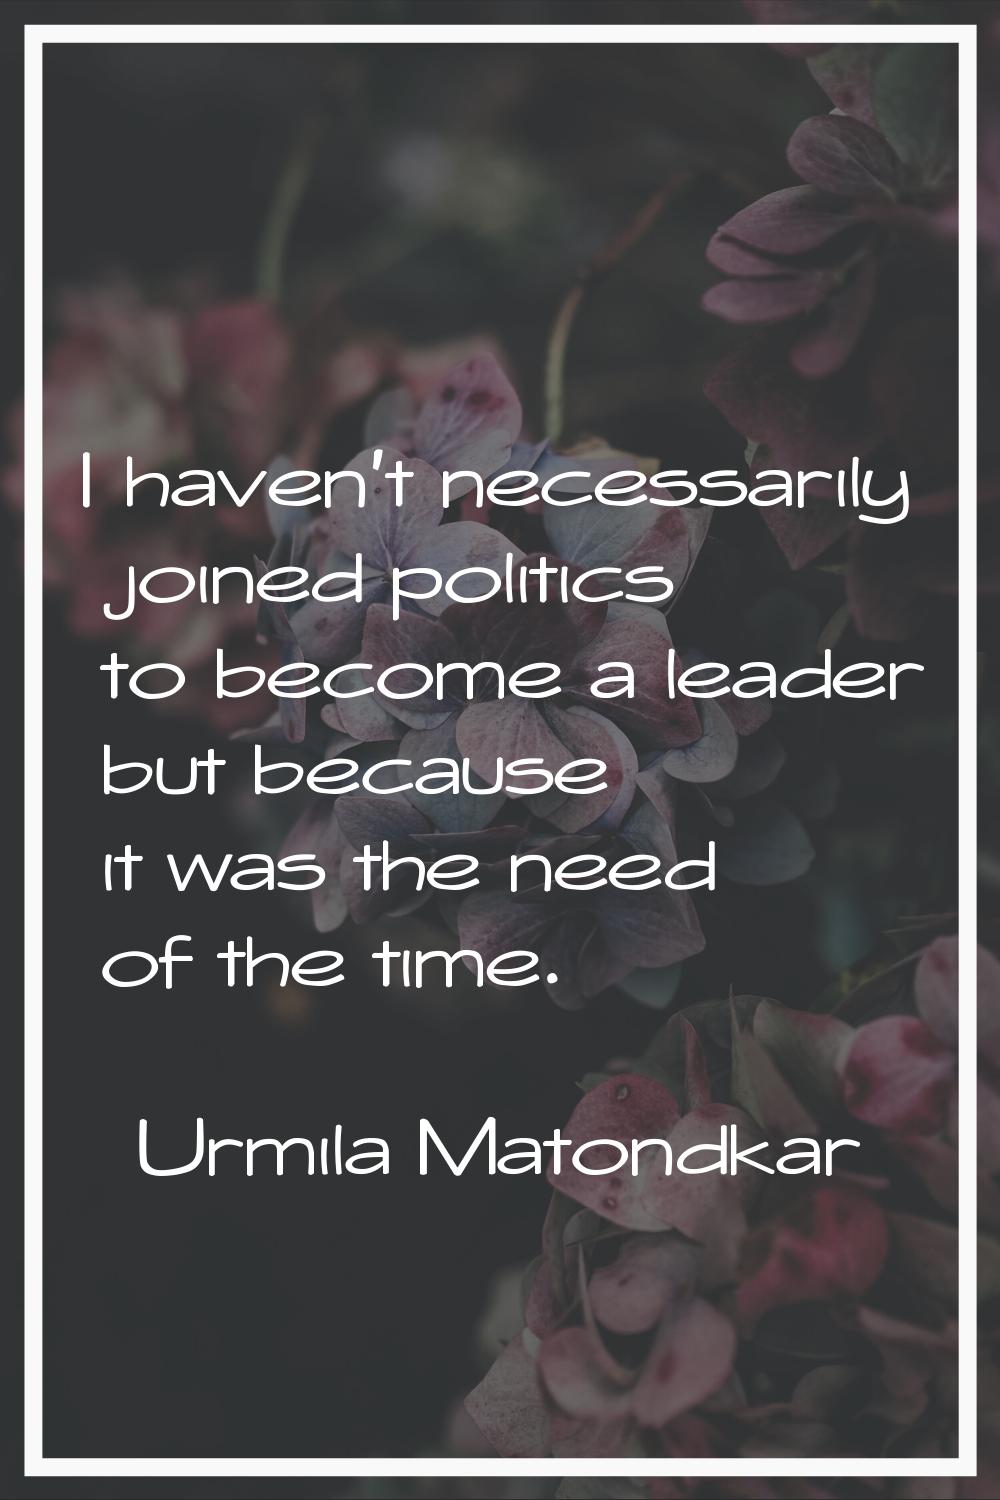 I haven't necessarily joined politics to become a leader but because it was the need of the time.